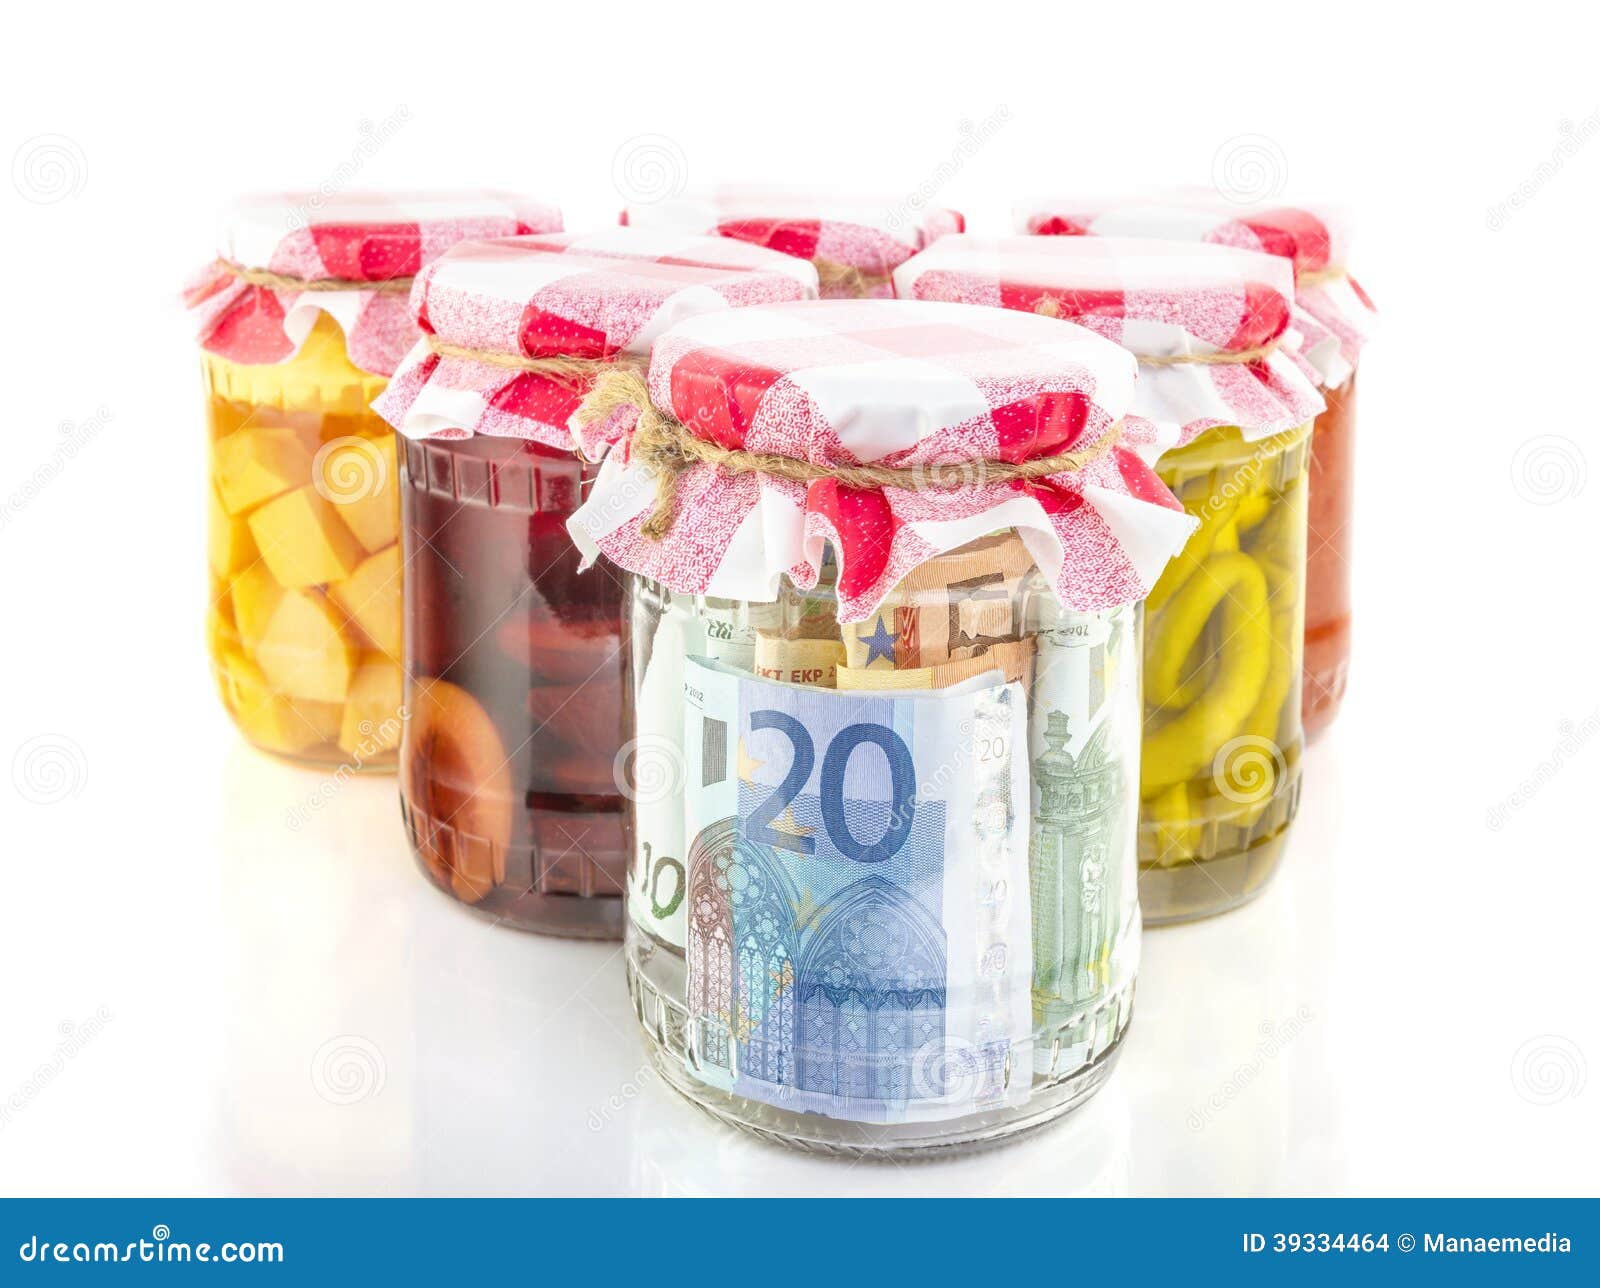 financial reserves money conserved in a glass jar